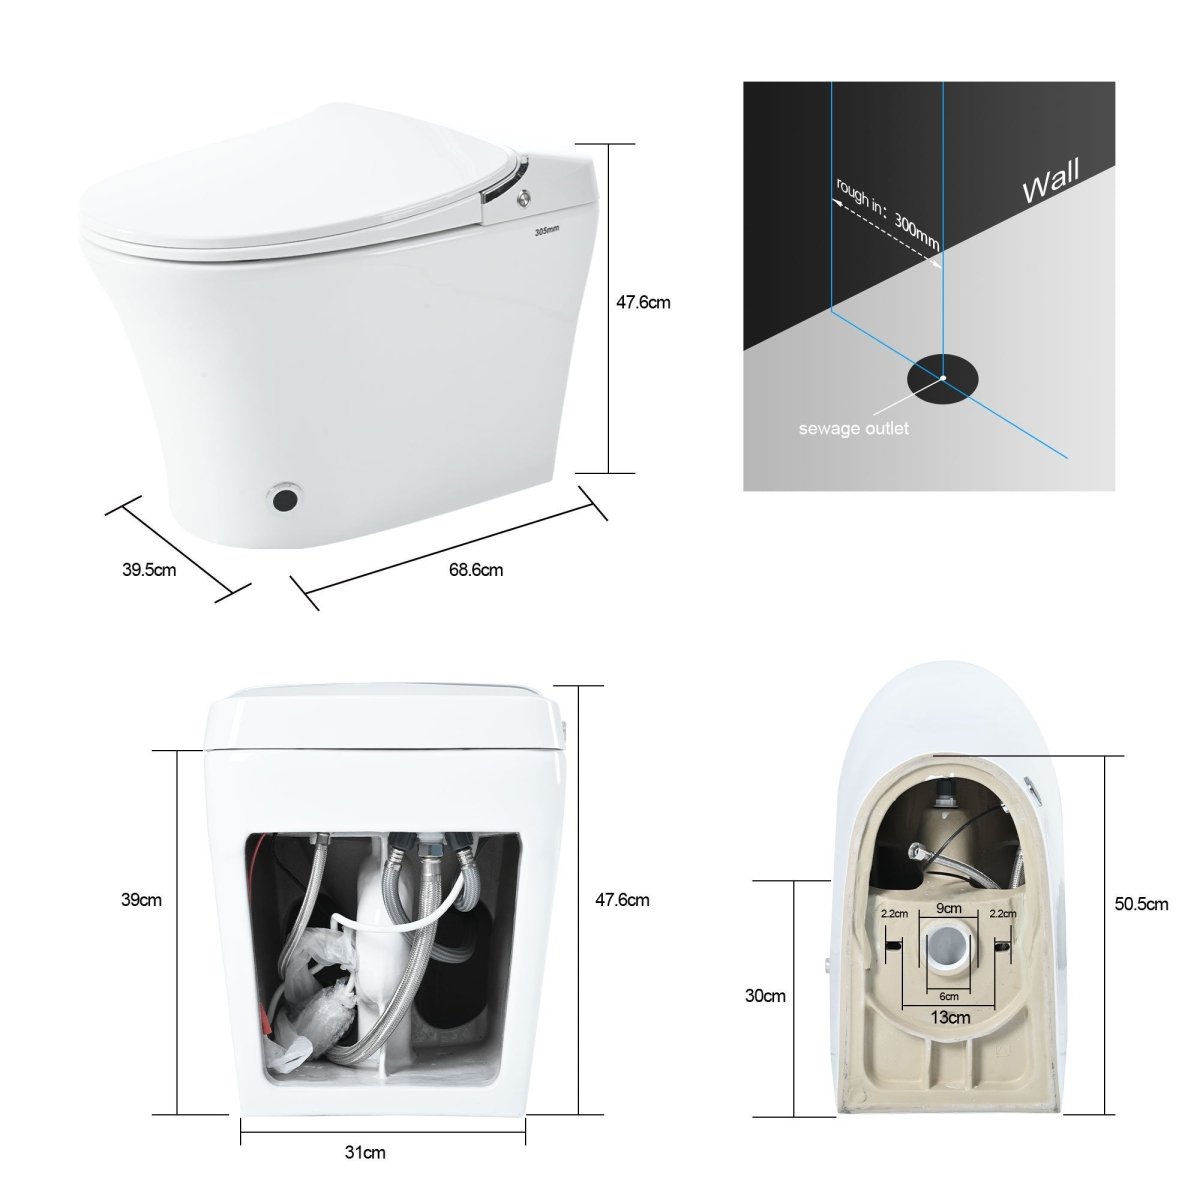 ExBrite Luxury Smart Toilet with Dryer,Warm Water,Elongated Bidet,Heated Seat,Remote Control,Night Light,Power Outage Flushing,Soft Close